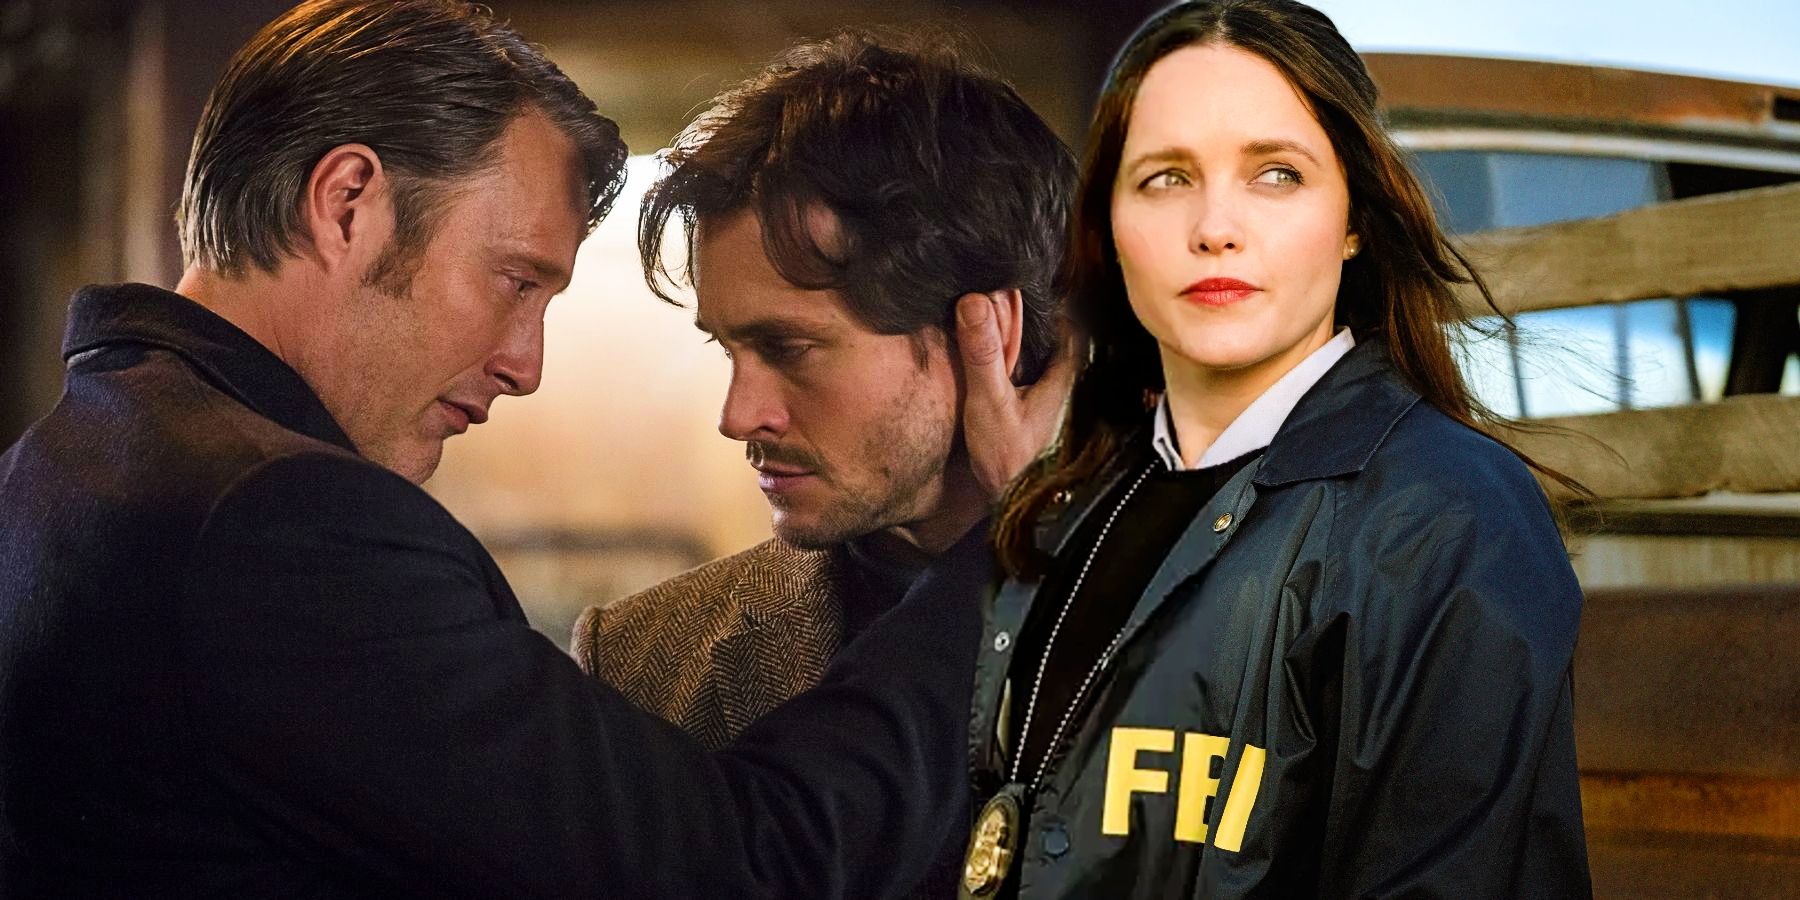 hannibal-legal-rights-problem-hurt-clarice-tv-show